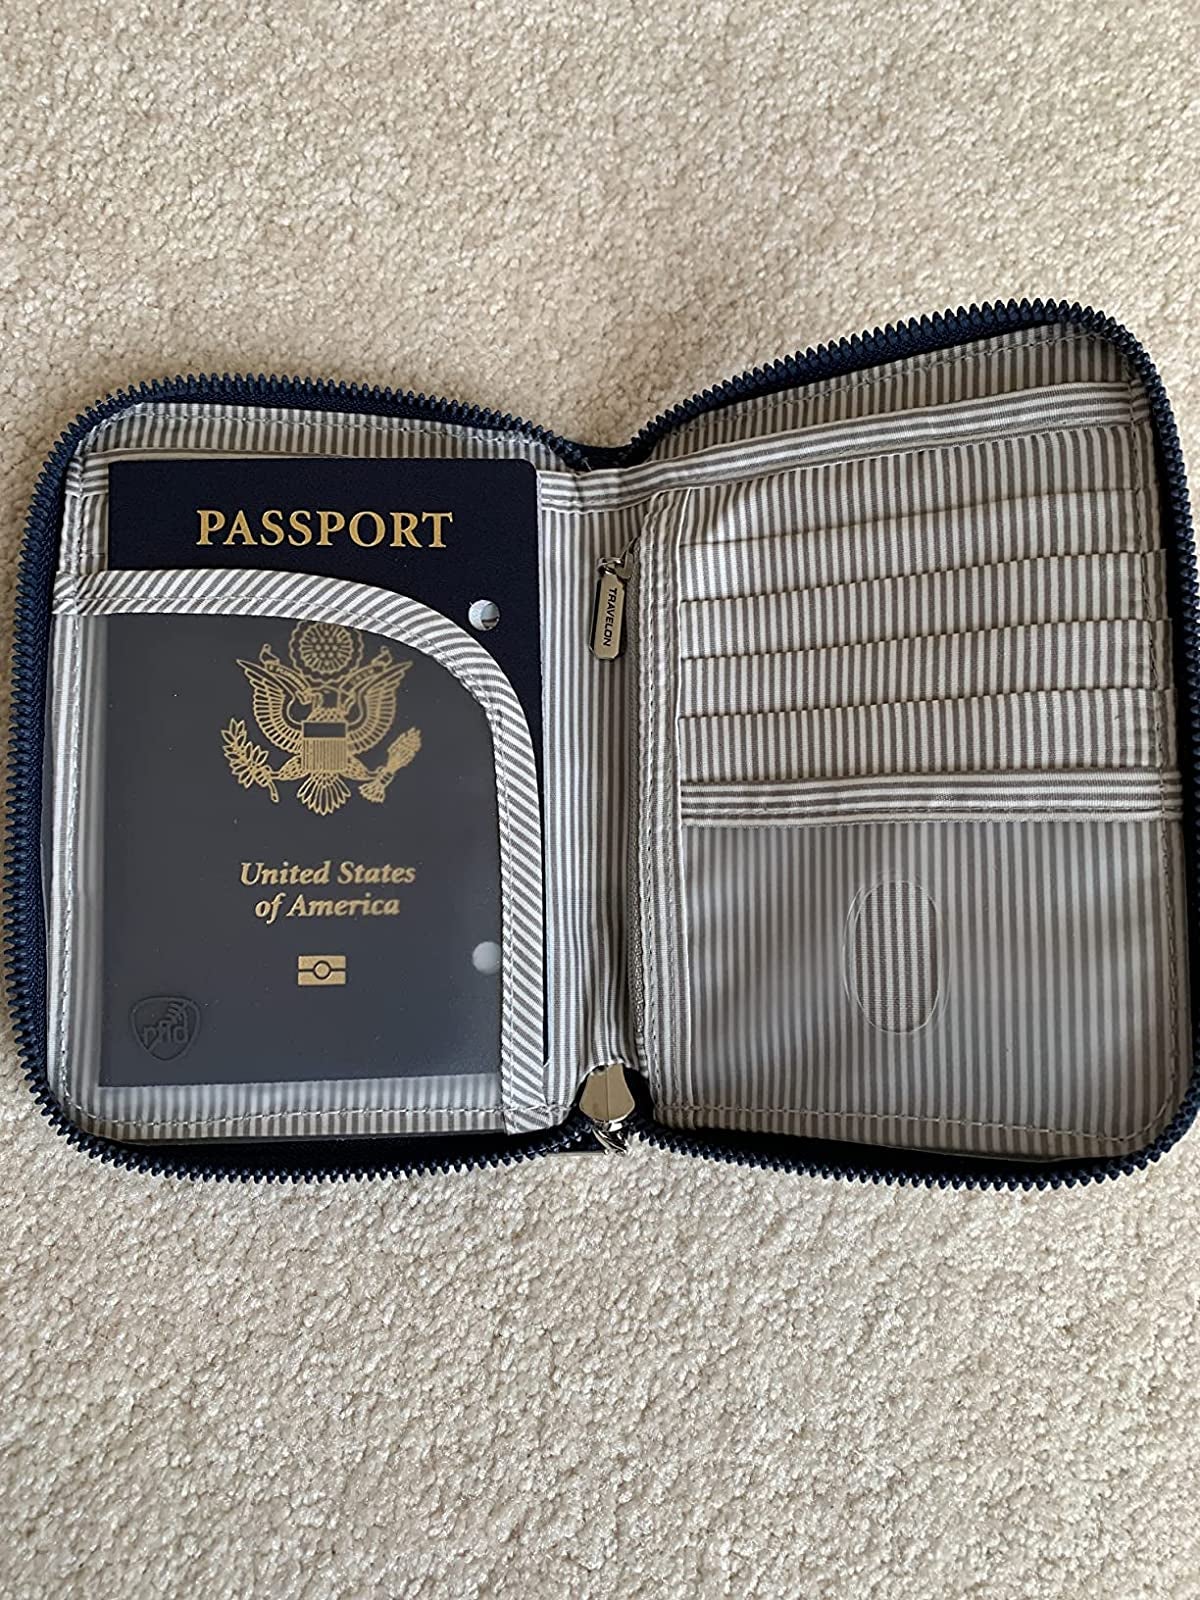 12 of the best passport covers for keeping your documents safe